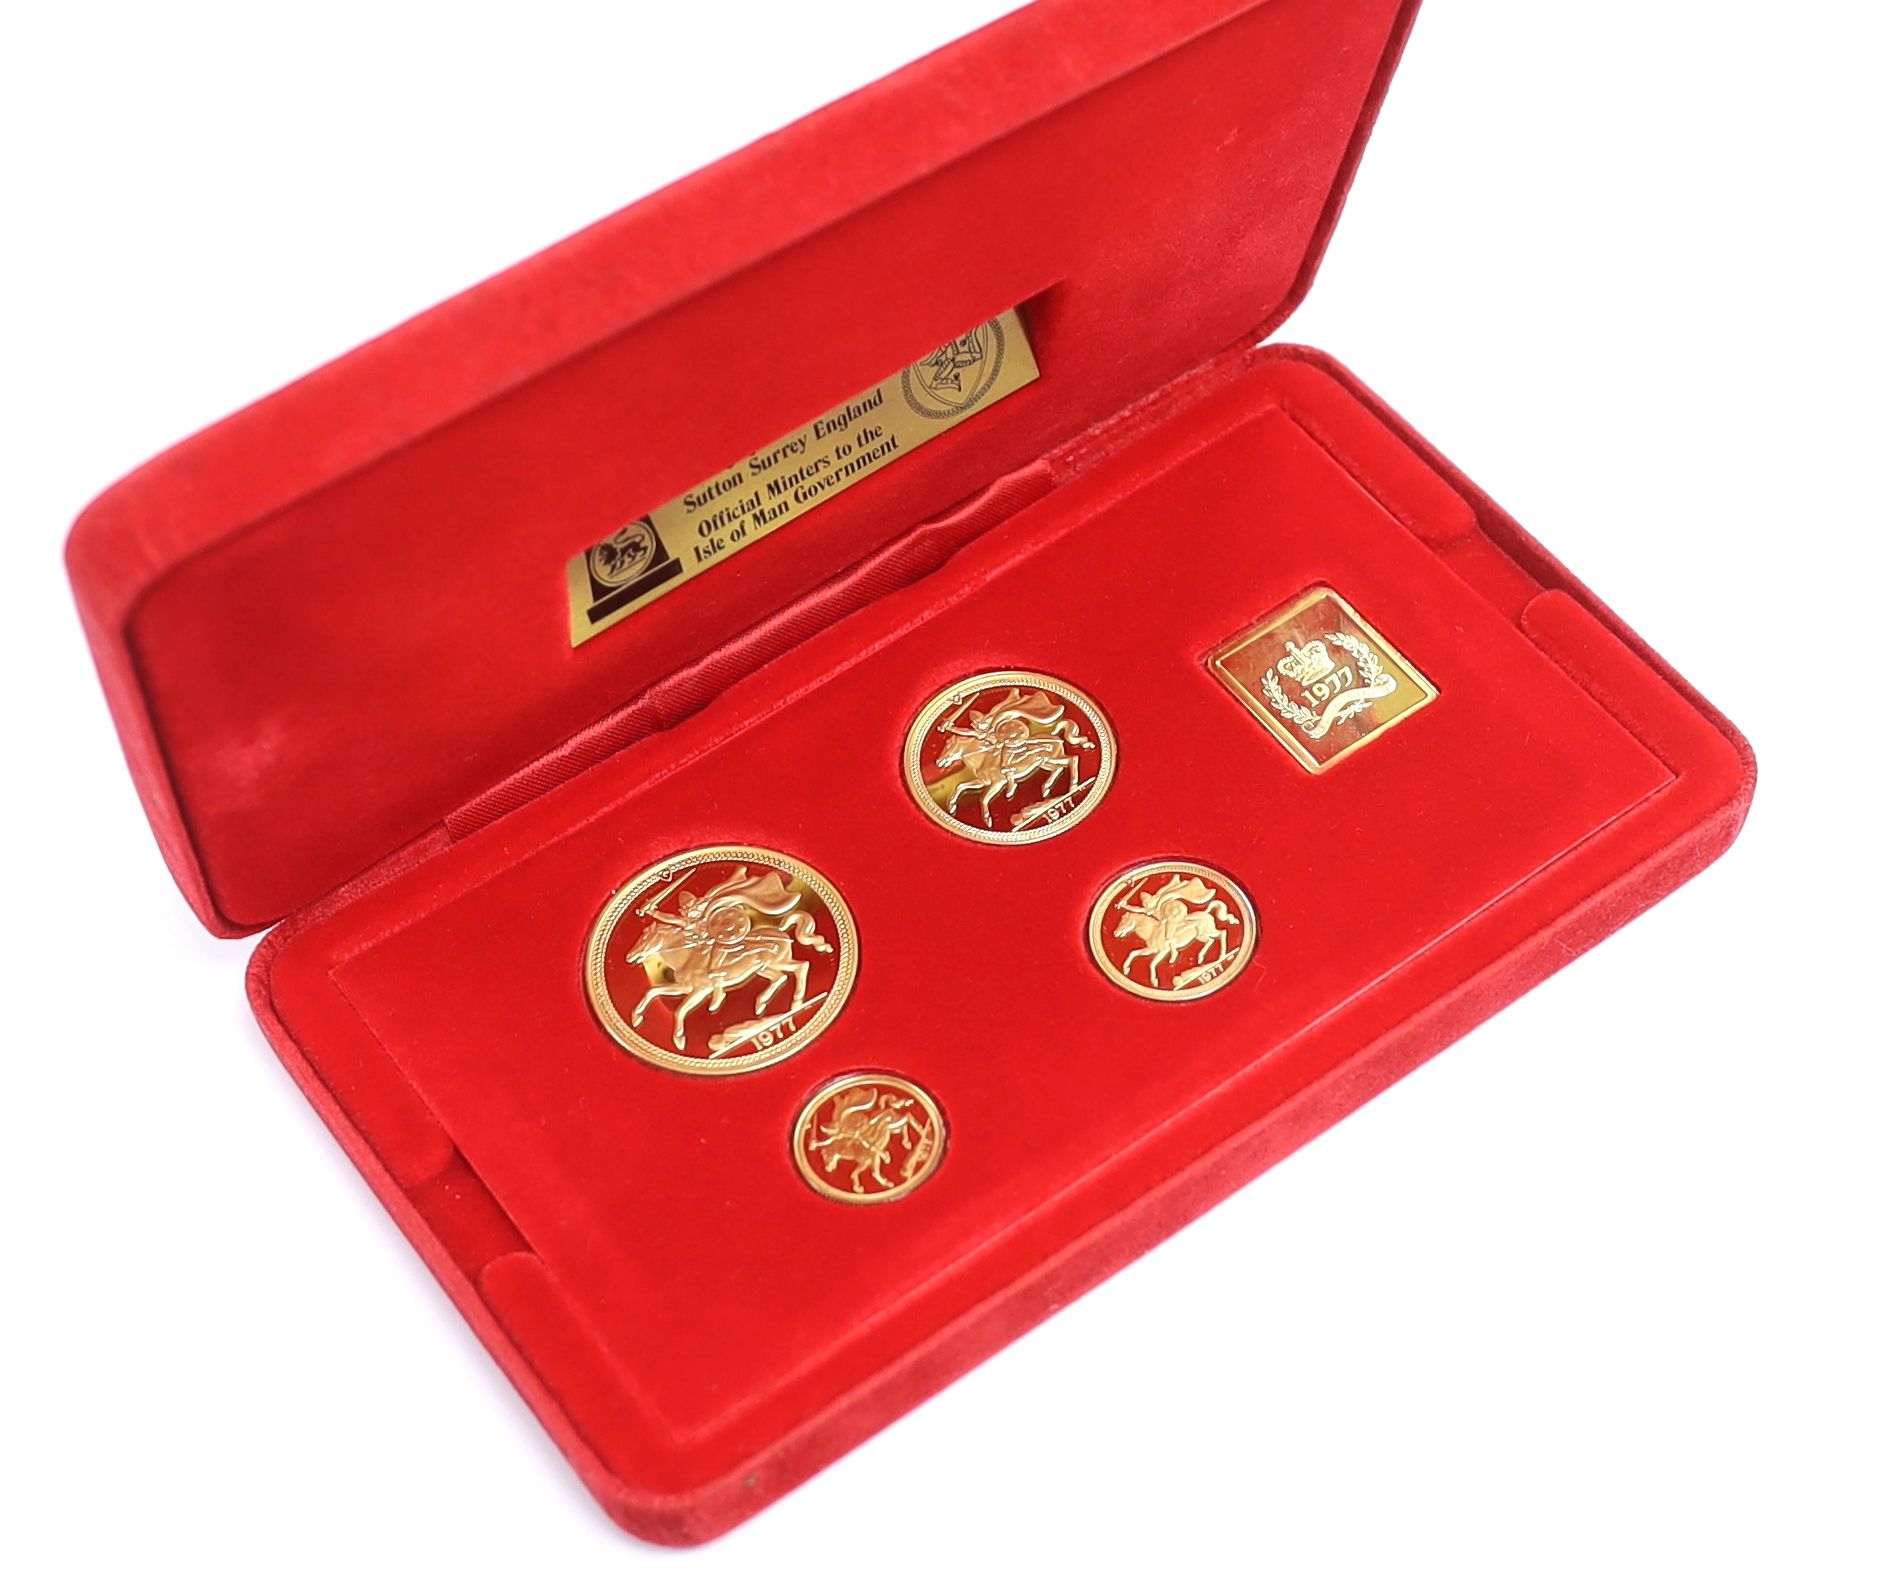 Gold coins - Isle of Man proof gold coin set, comprising half sovereign, sovereign, £2 and £5 coins, limited edition 1,250, in case of issue